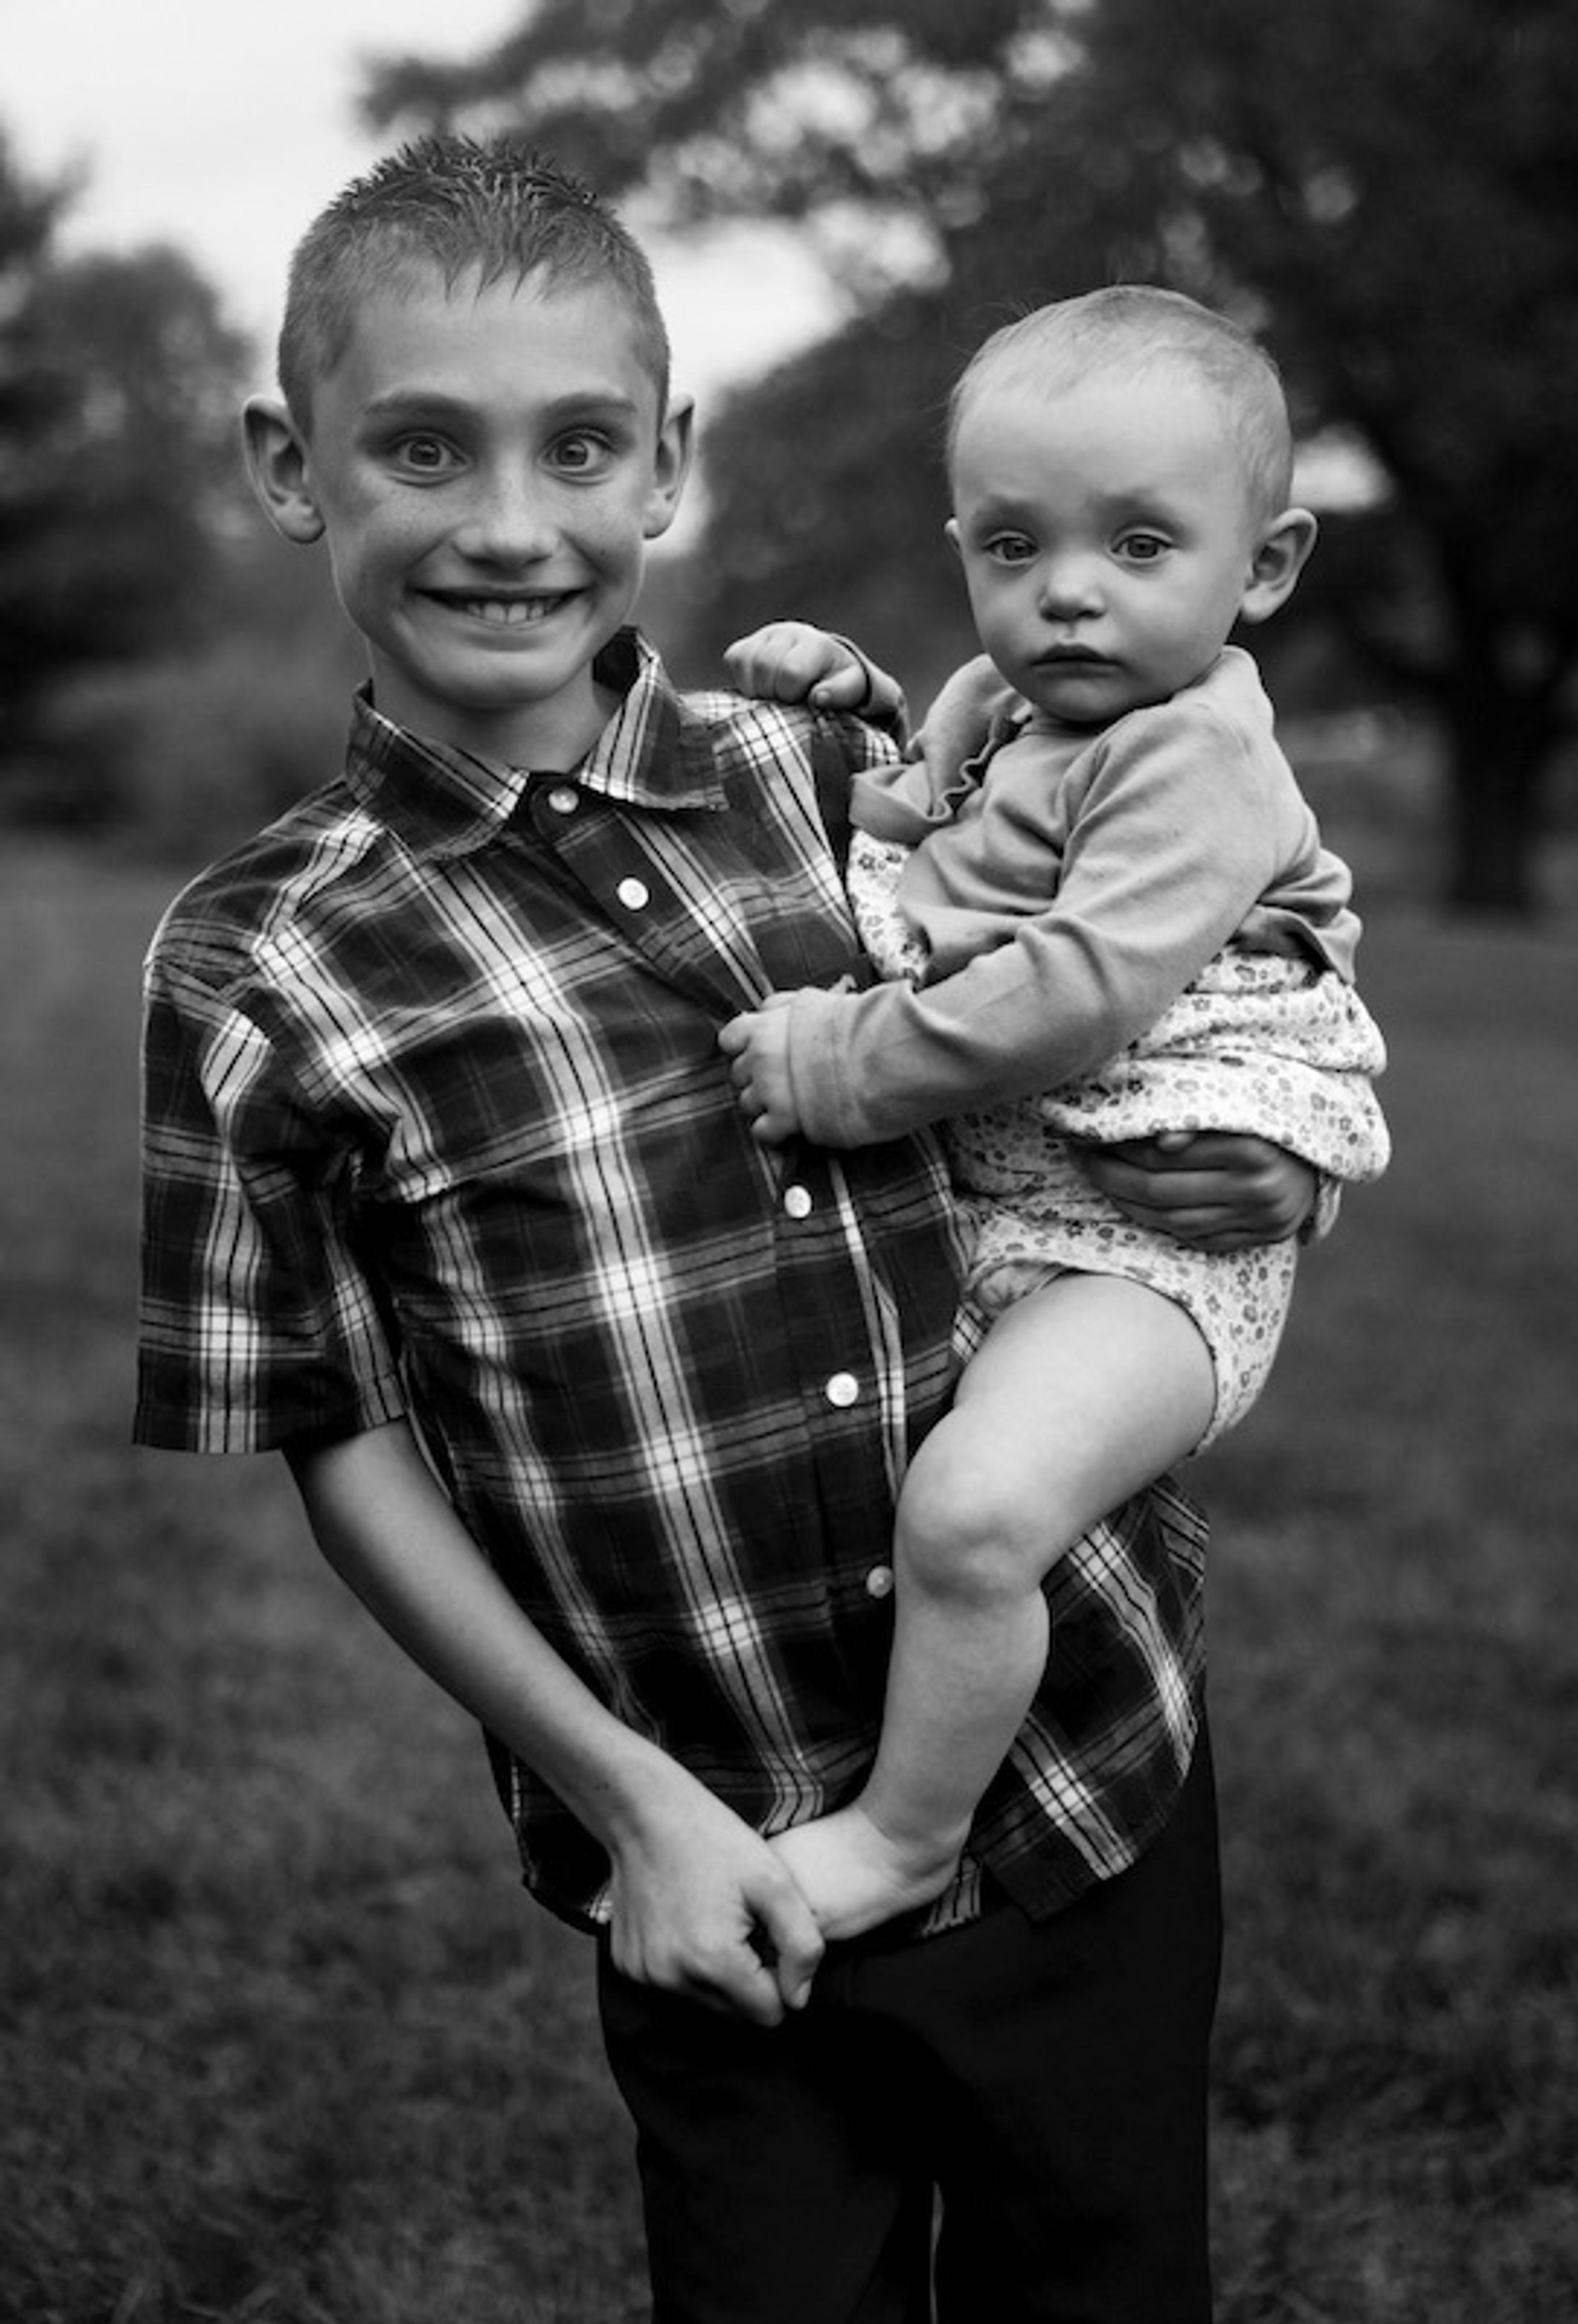 A black and white photograph of a young boy in a plaid shirt smiles and holds a baby on his hip